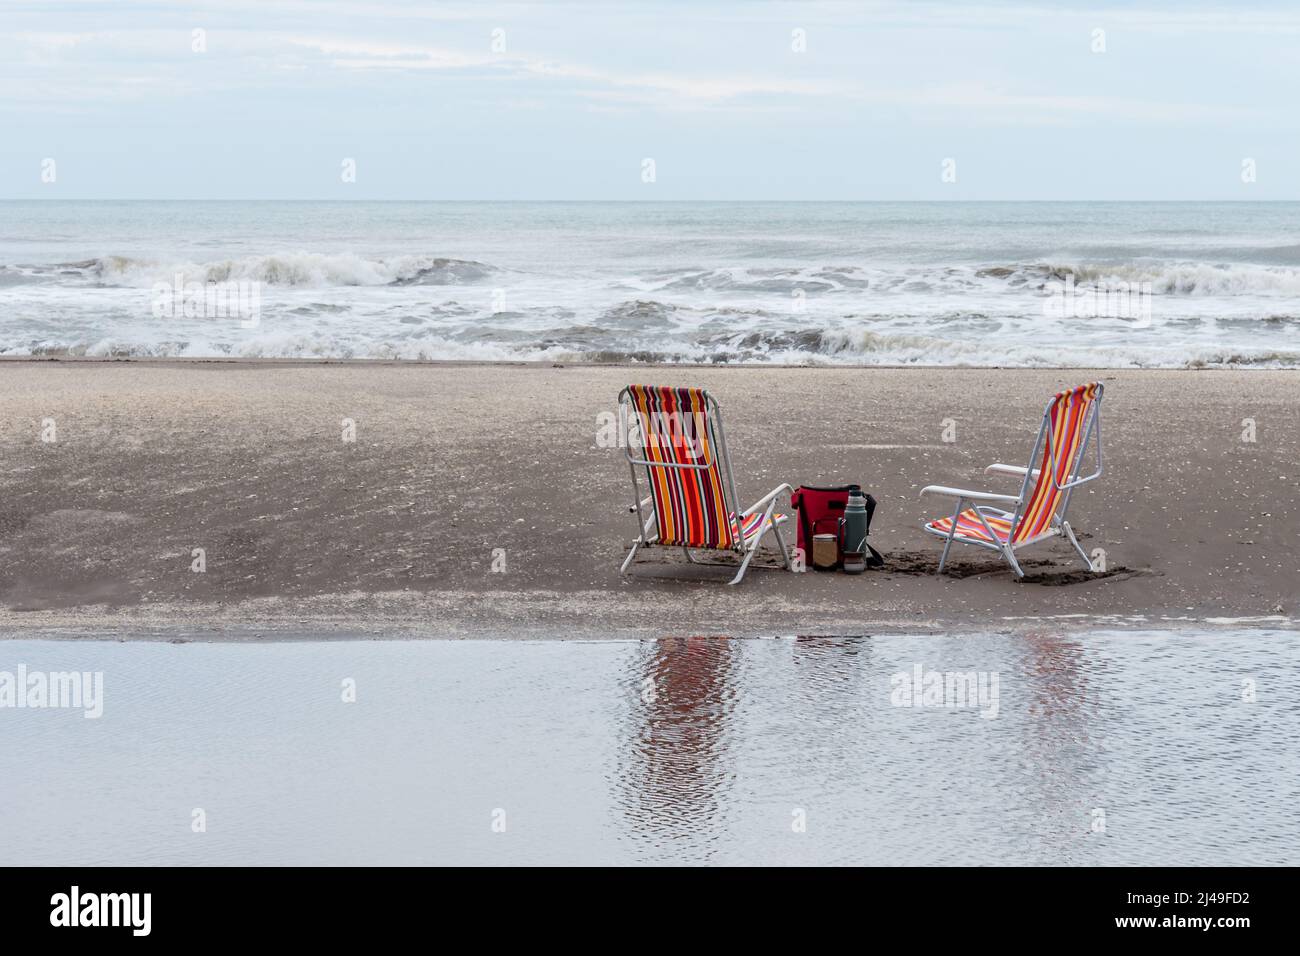 https://c8.alamy.com/comp/2J49FD2/mate-set-bag-yerba-mate-container-mate-and-thermos-next-to-two-beach-chairs-on-the-beach-reflected-in-the-water-2J49FD2.jpg